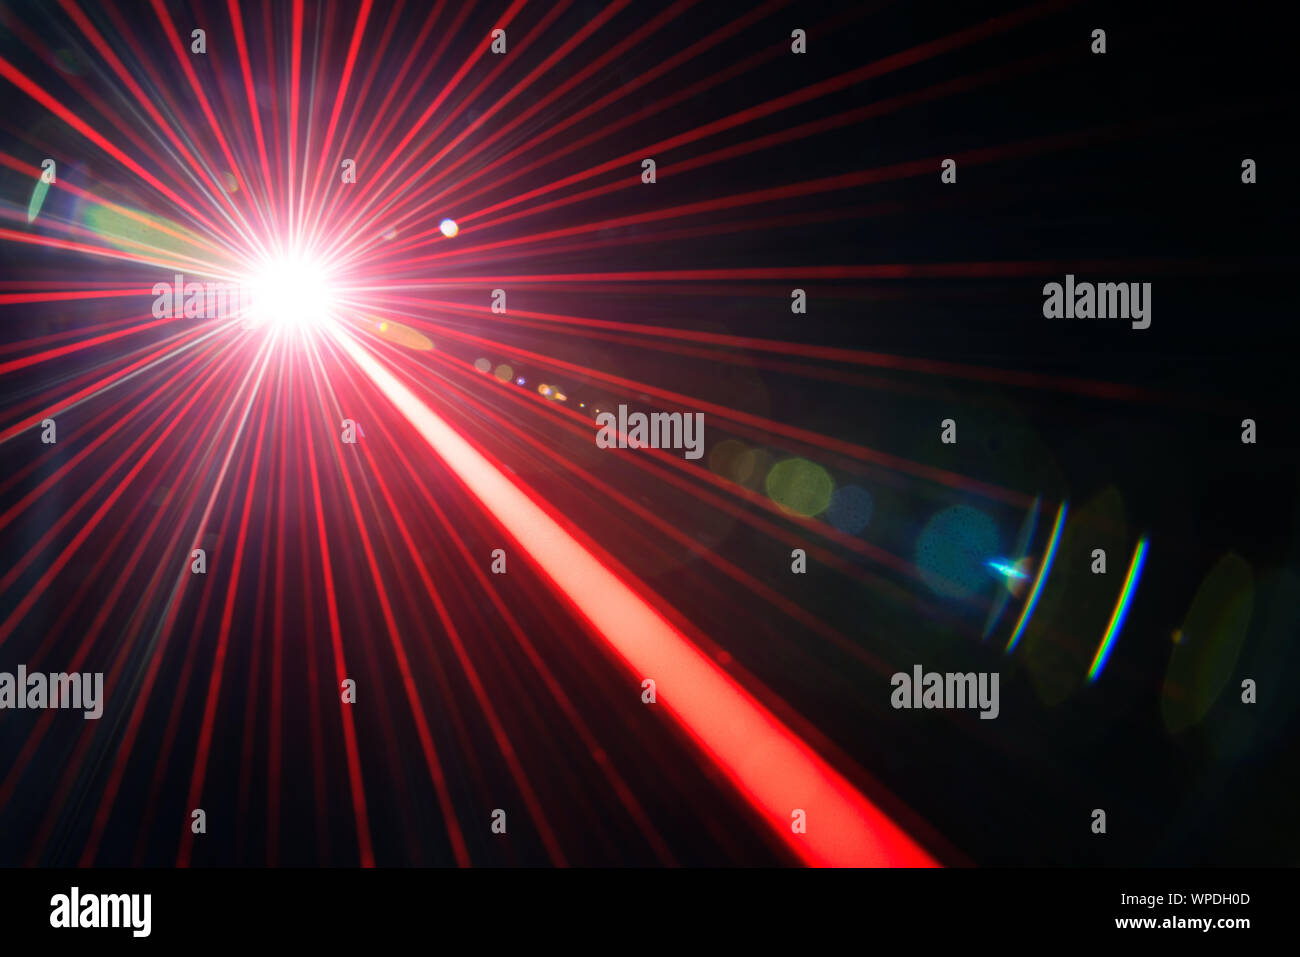 Red laser beam light effect with flares on black background Stock Photo